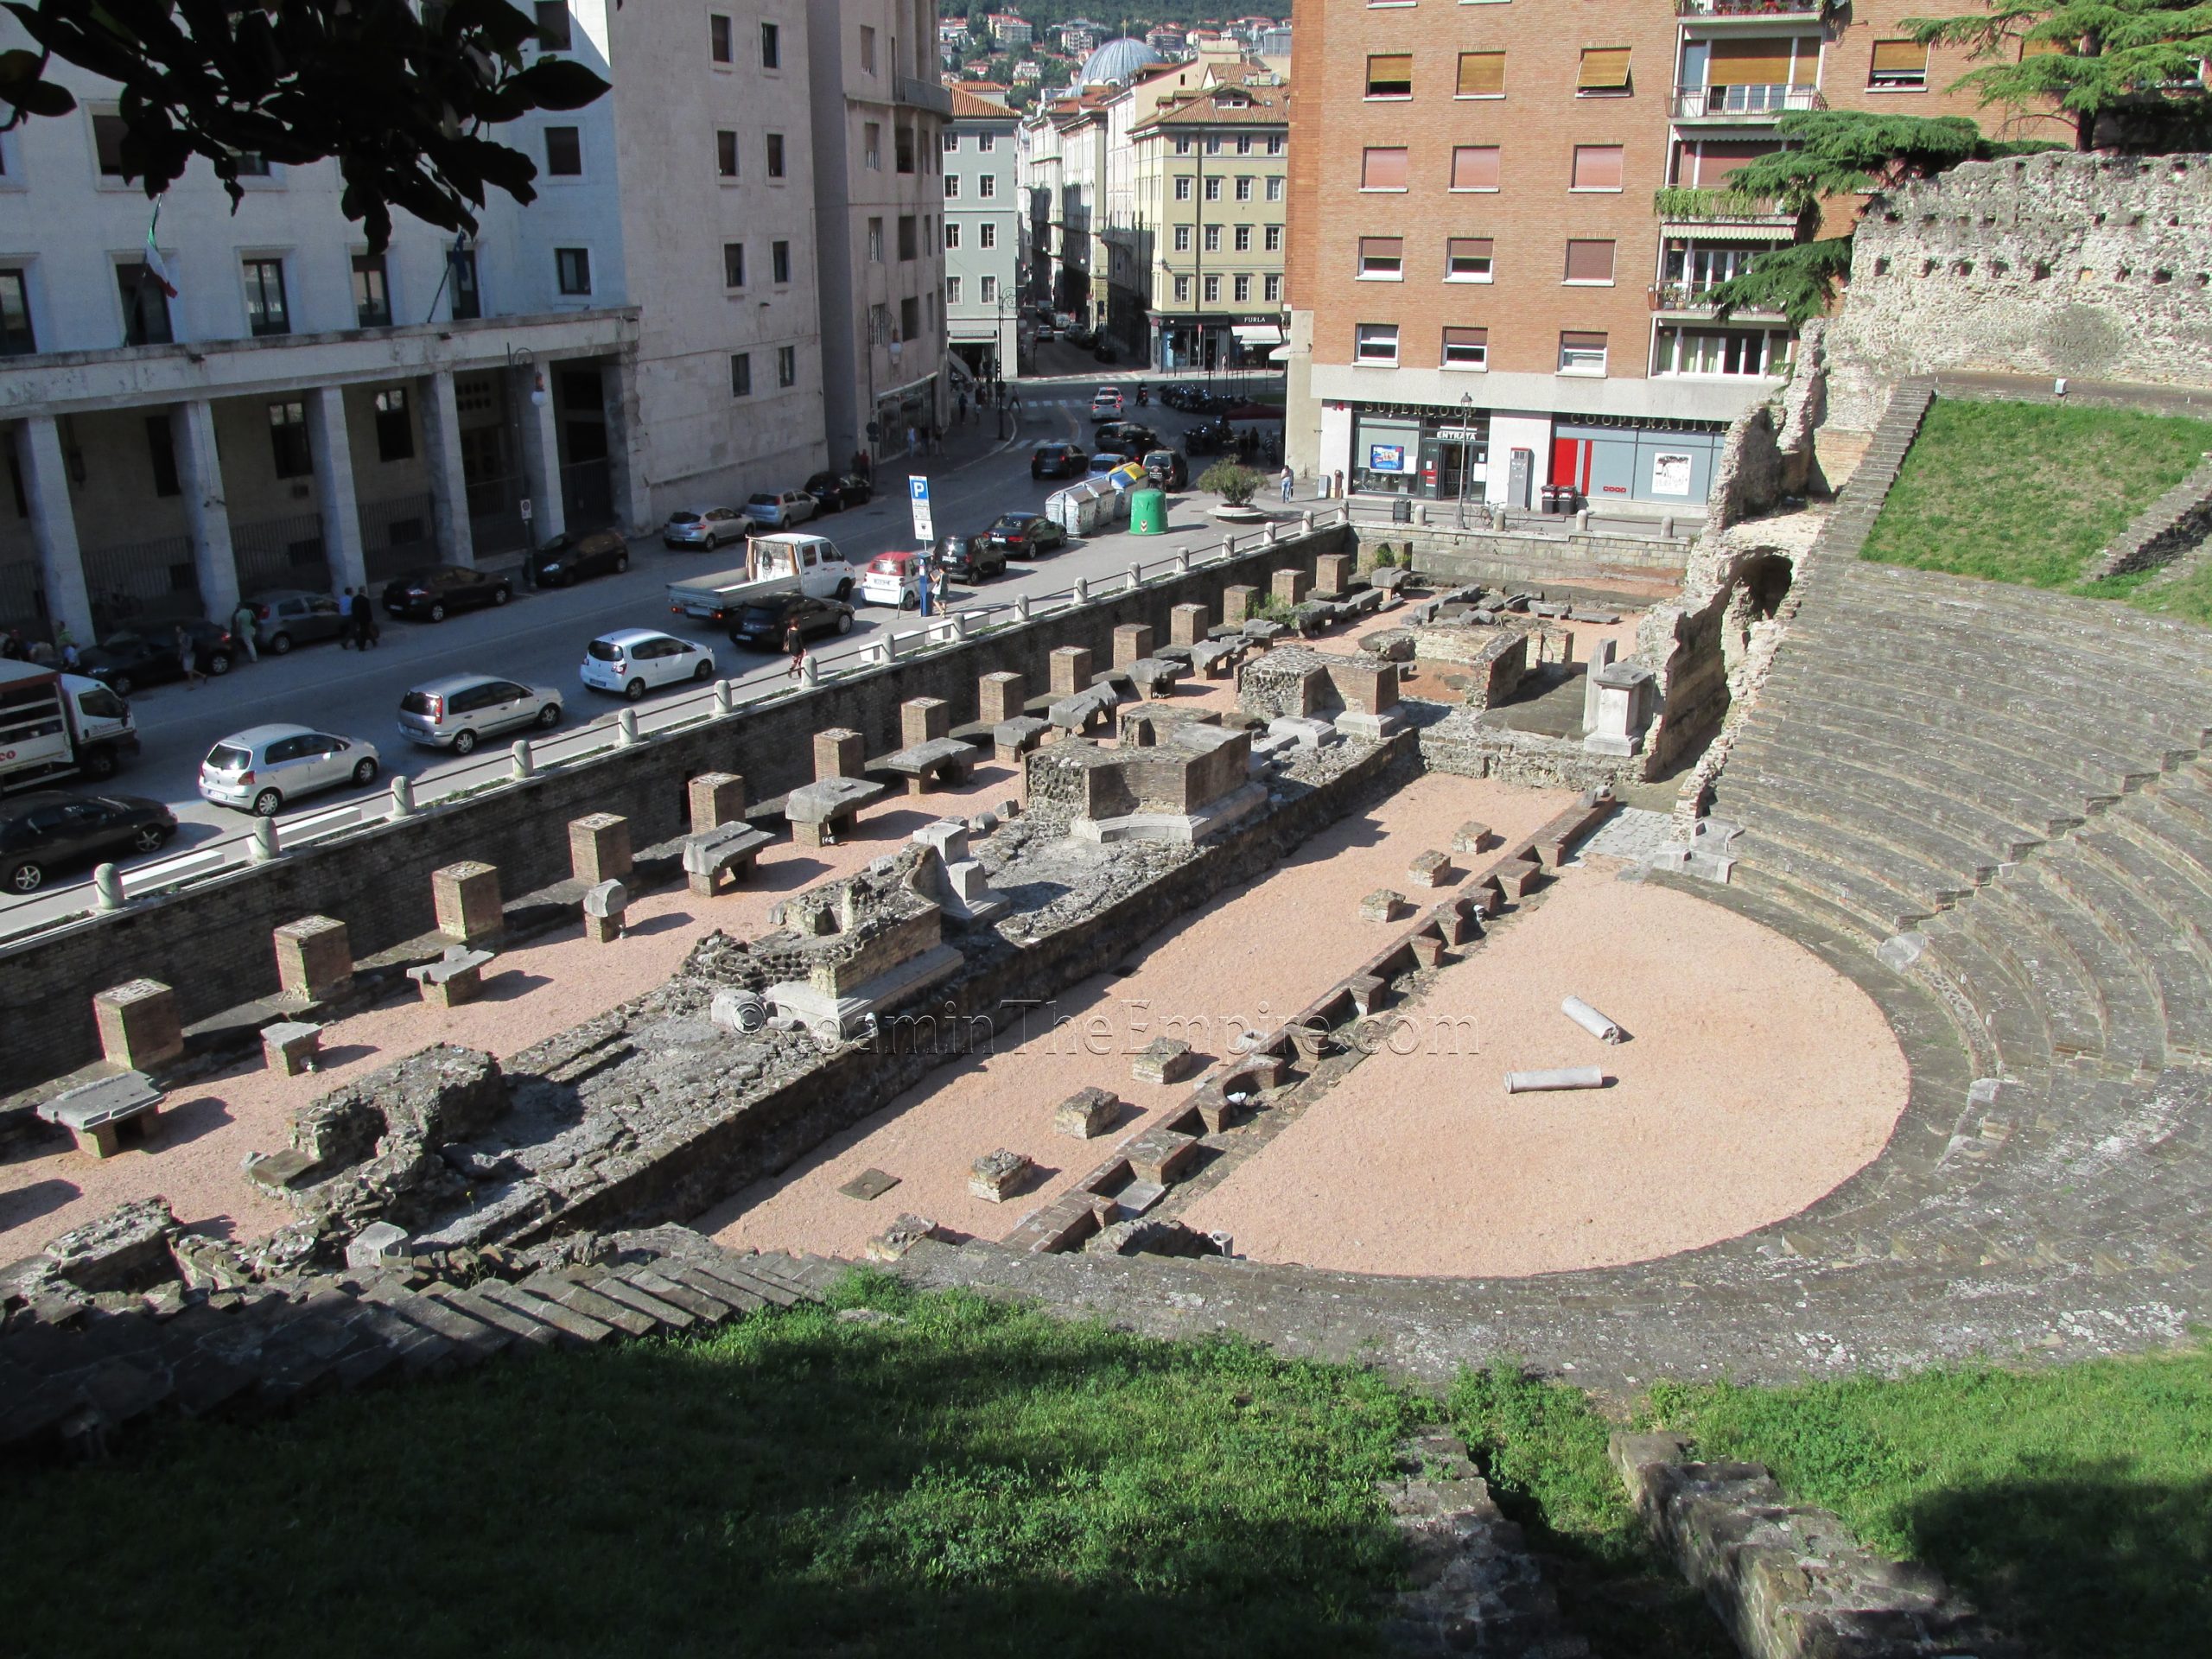 Theater of Tergeste.